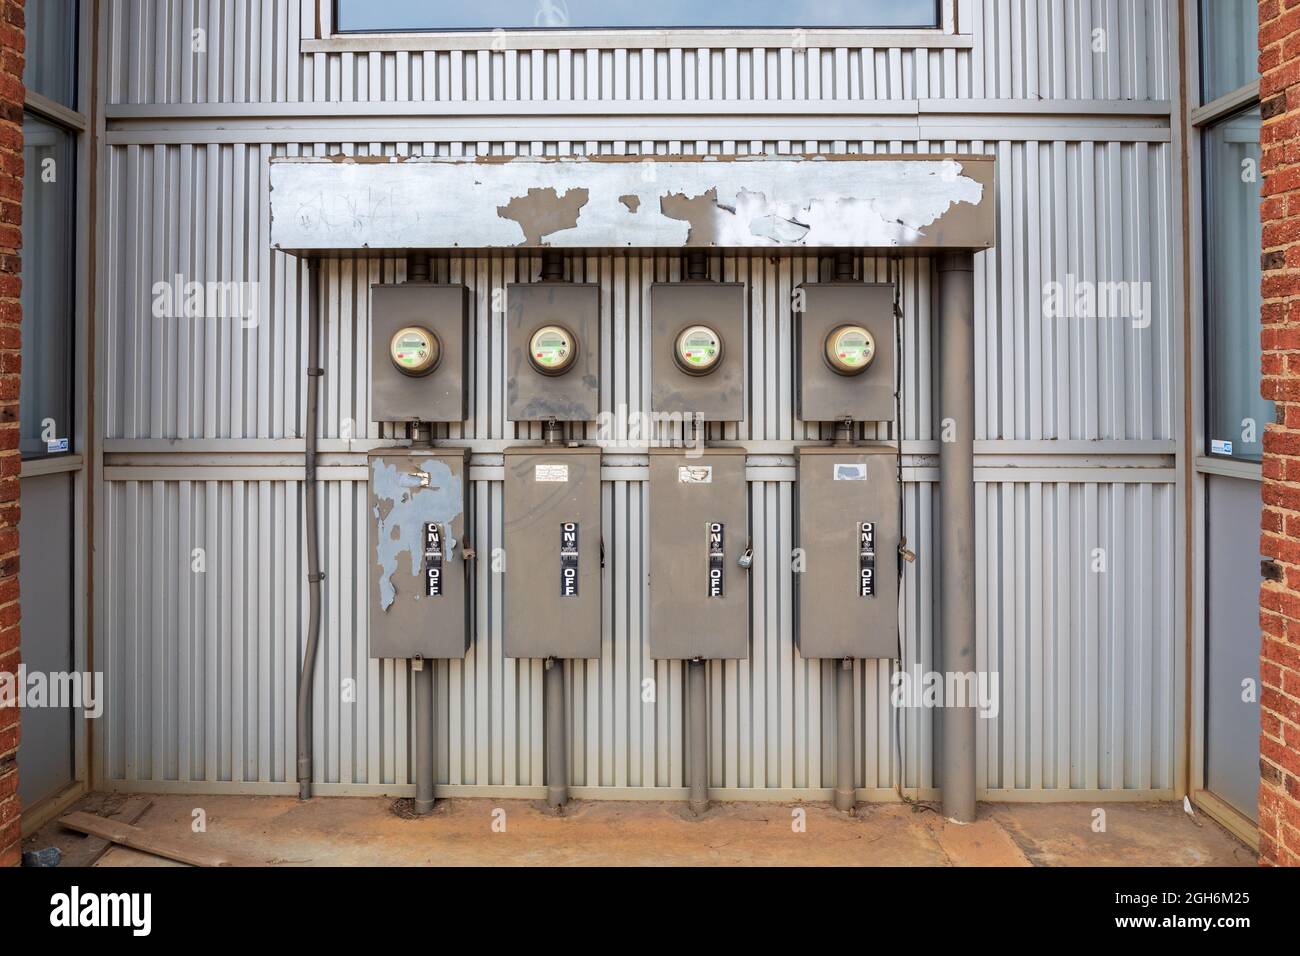 CHARLOTTE, NC, USA-25 JULY 2021: A wall of four electric power meters and boxes of breakers along with a master on/off switch. Stock Photo